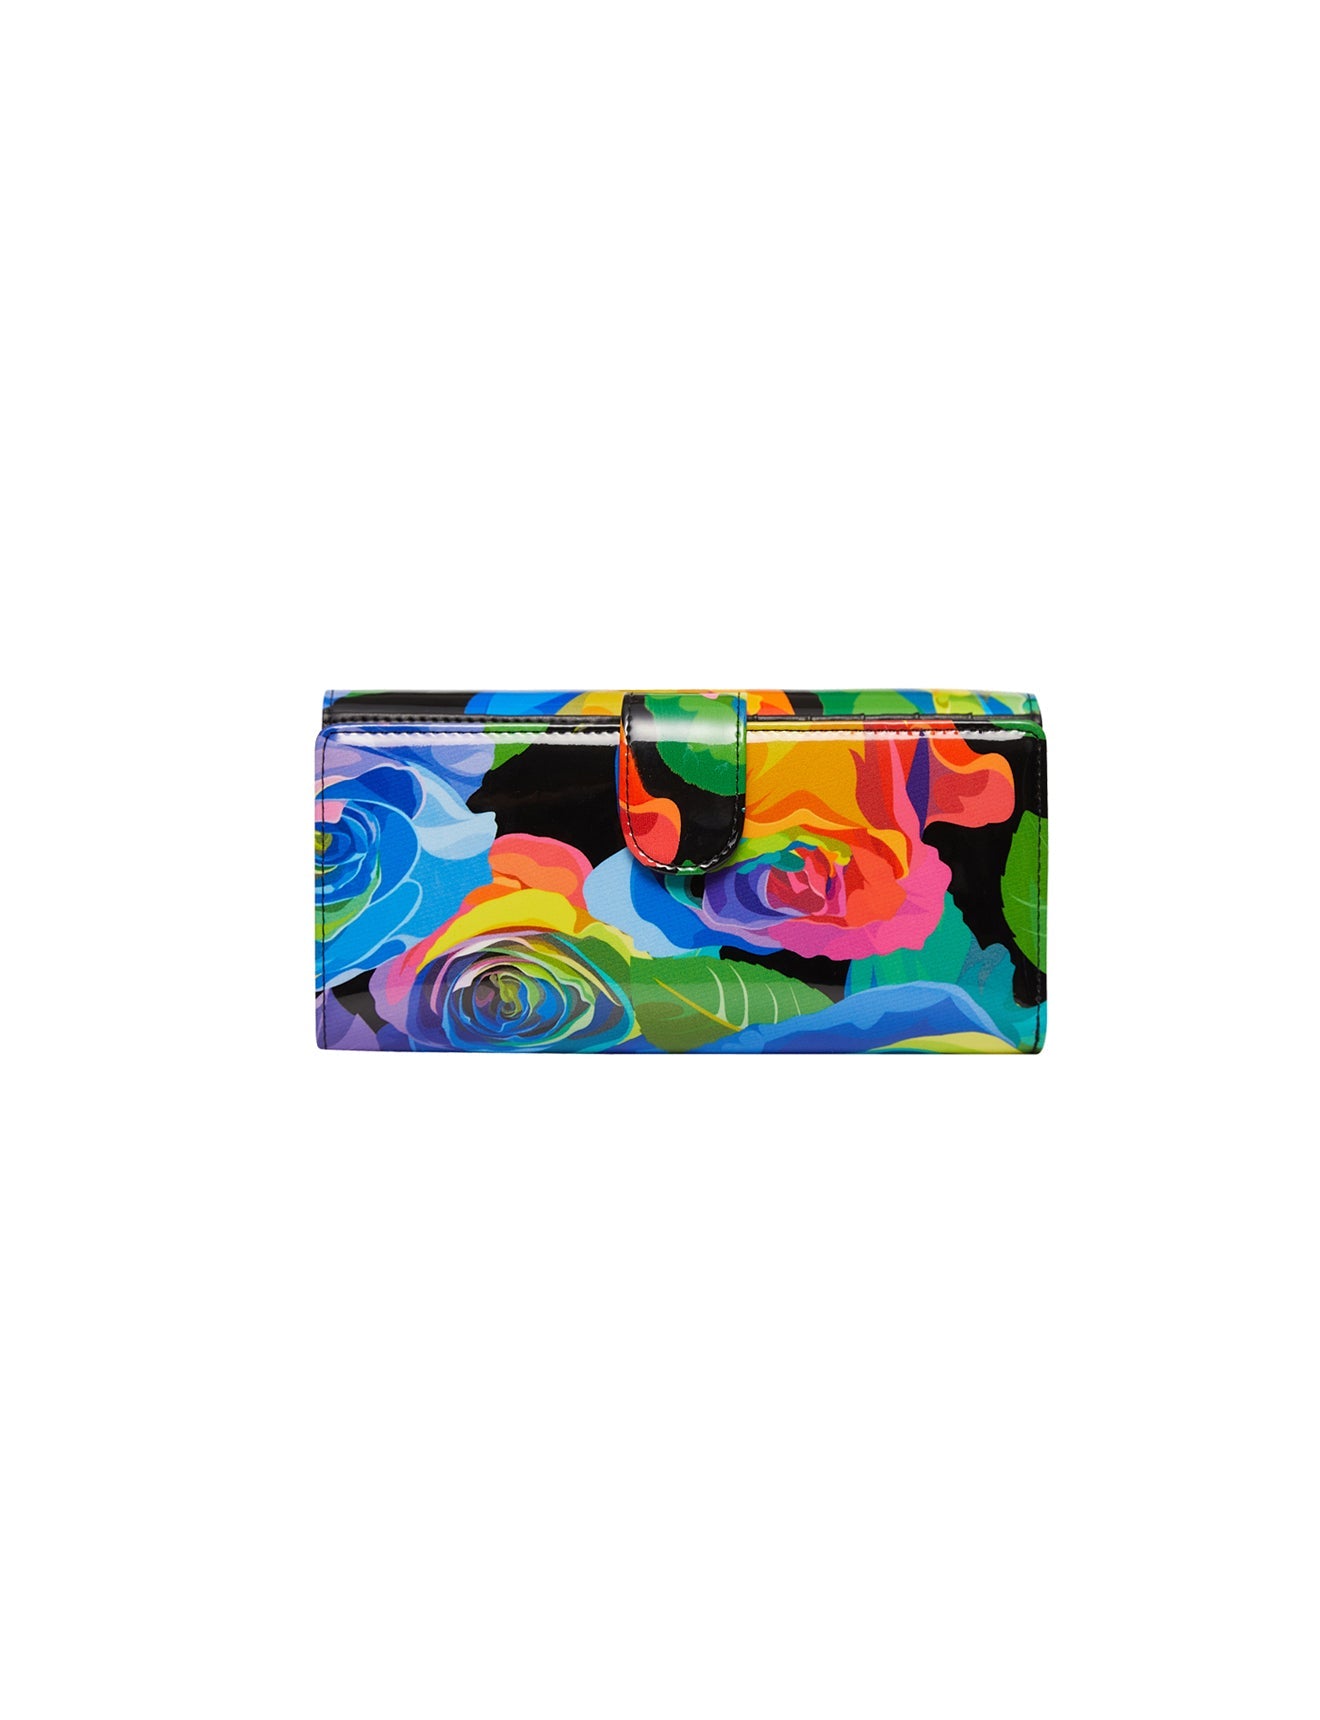 Serenade - Rainbow Rose WSN-3601 Leather Wallet - Large-2